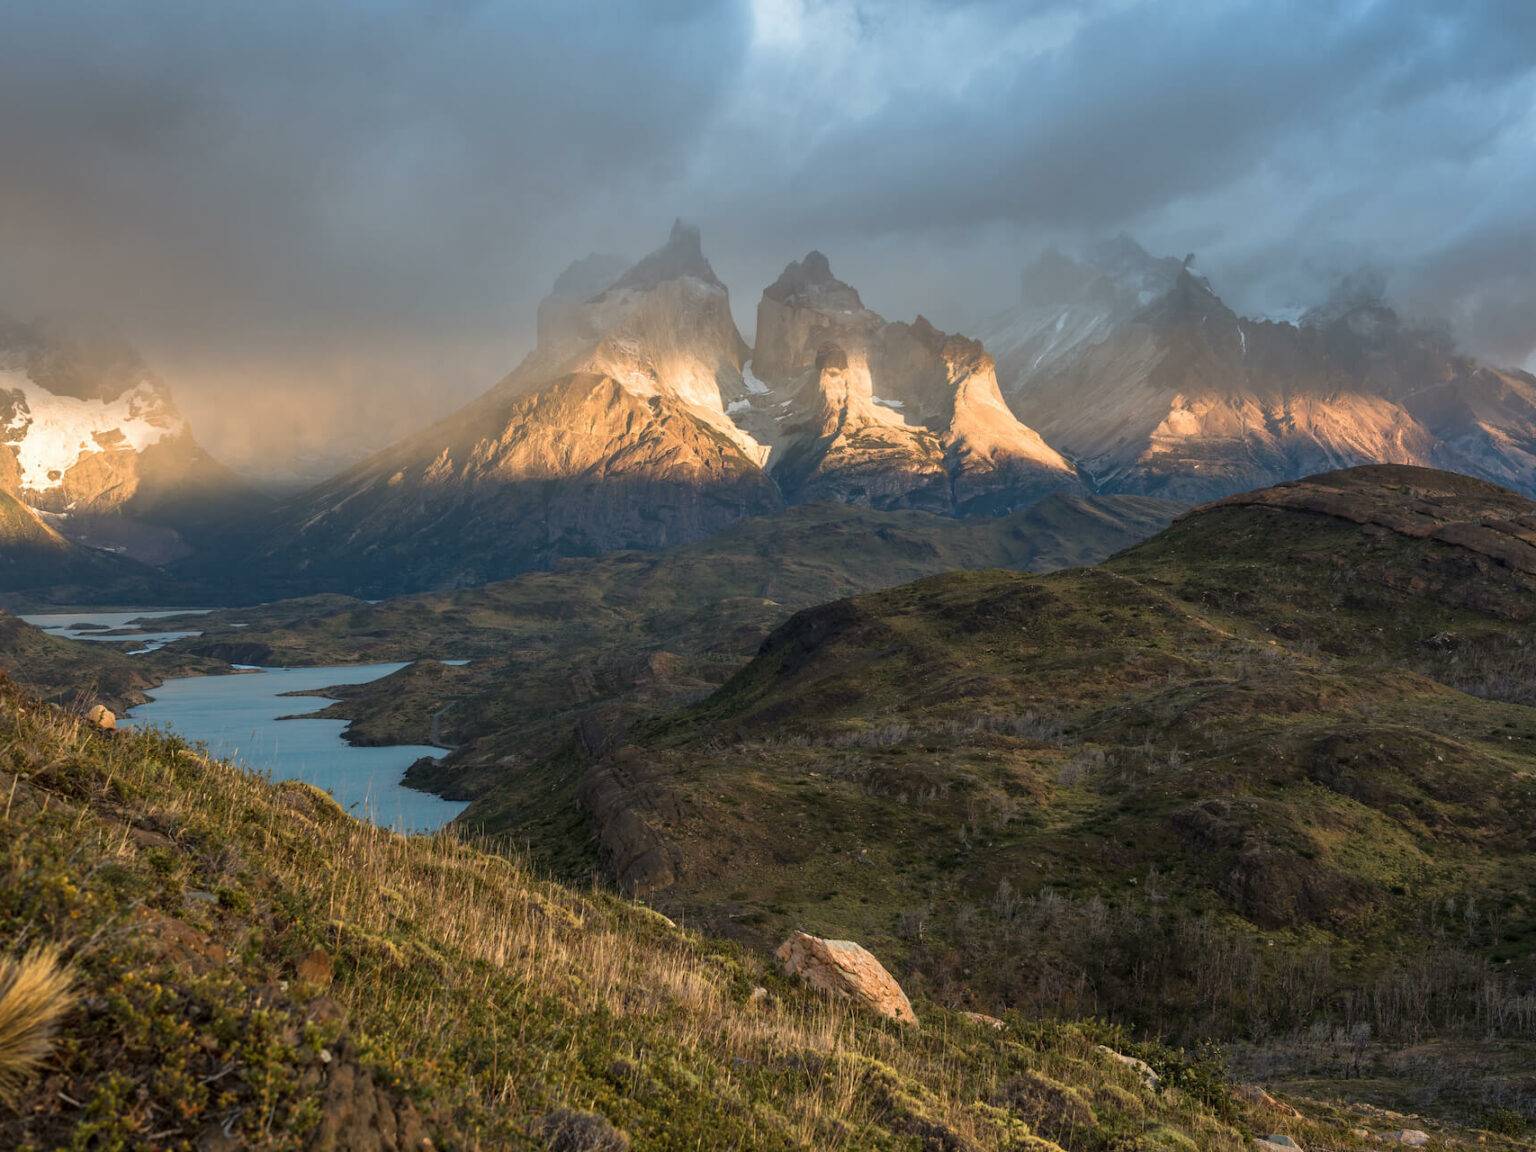 Sonnenaufgang im Torres del Paine Nationalpark in Chile